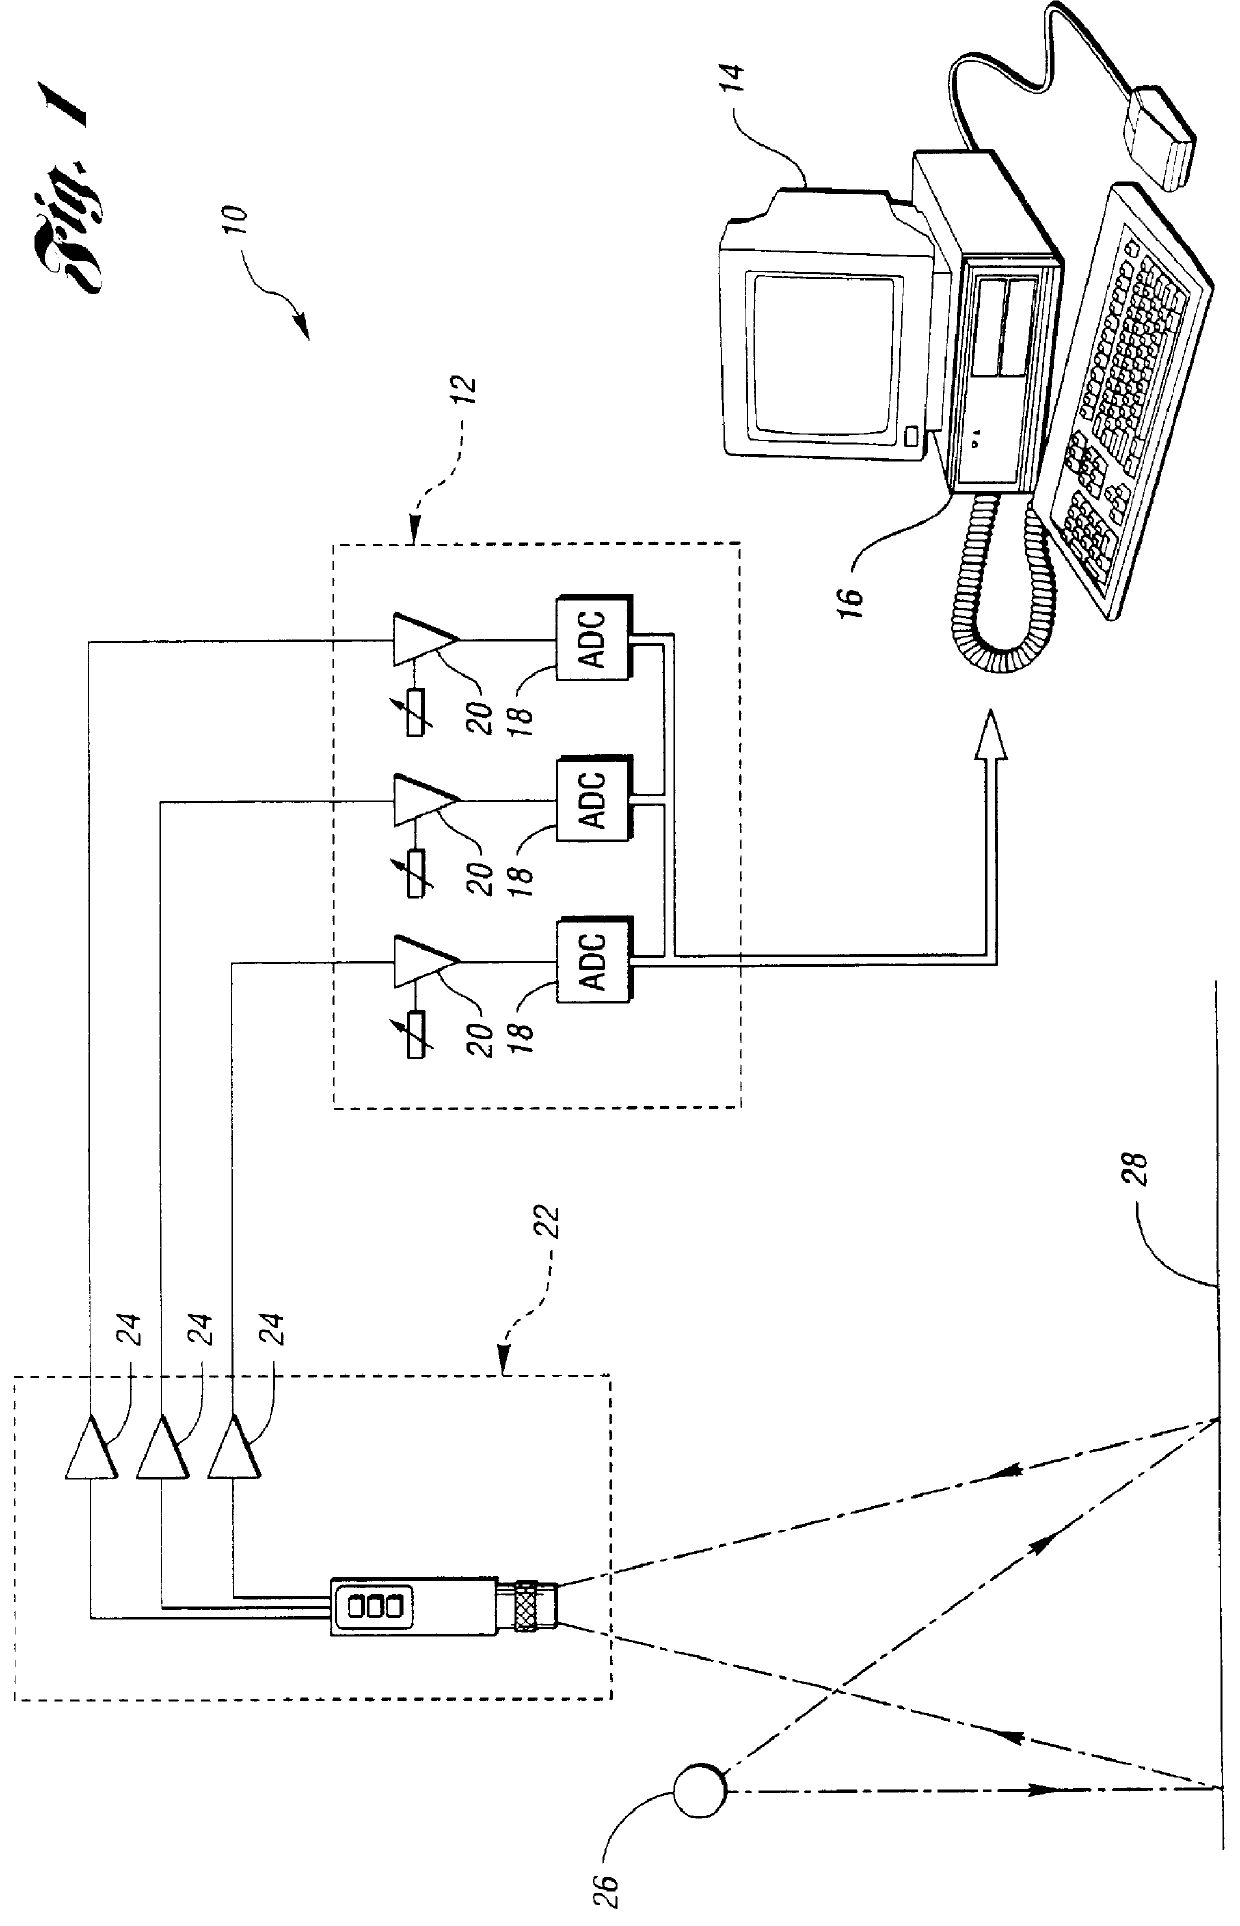 Method and system for automatically calibrating a color-based machine vision system